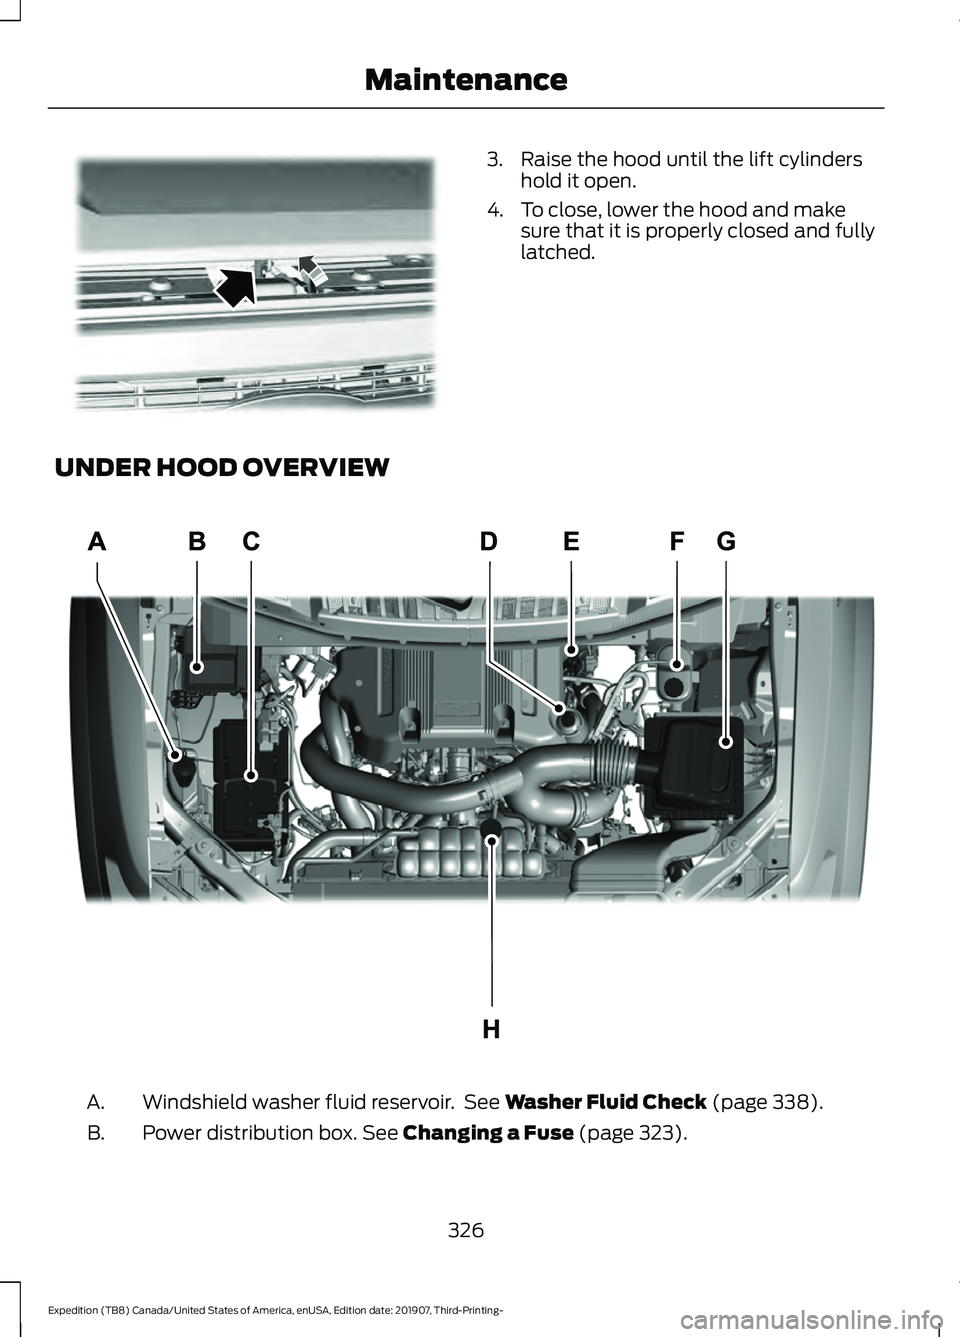 FORD EXPEDITION 2020  Owners Manual 3. Raise the hood until the lift cylinders
hold it open.
4. To close, lower the hood and make sure that it is properly closed and fully
latched.
UNDER HOOD OVERVIEW Windshield washer fluid reservoir. 